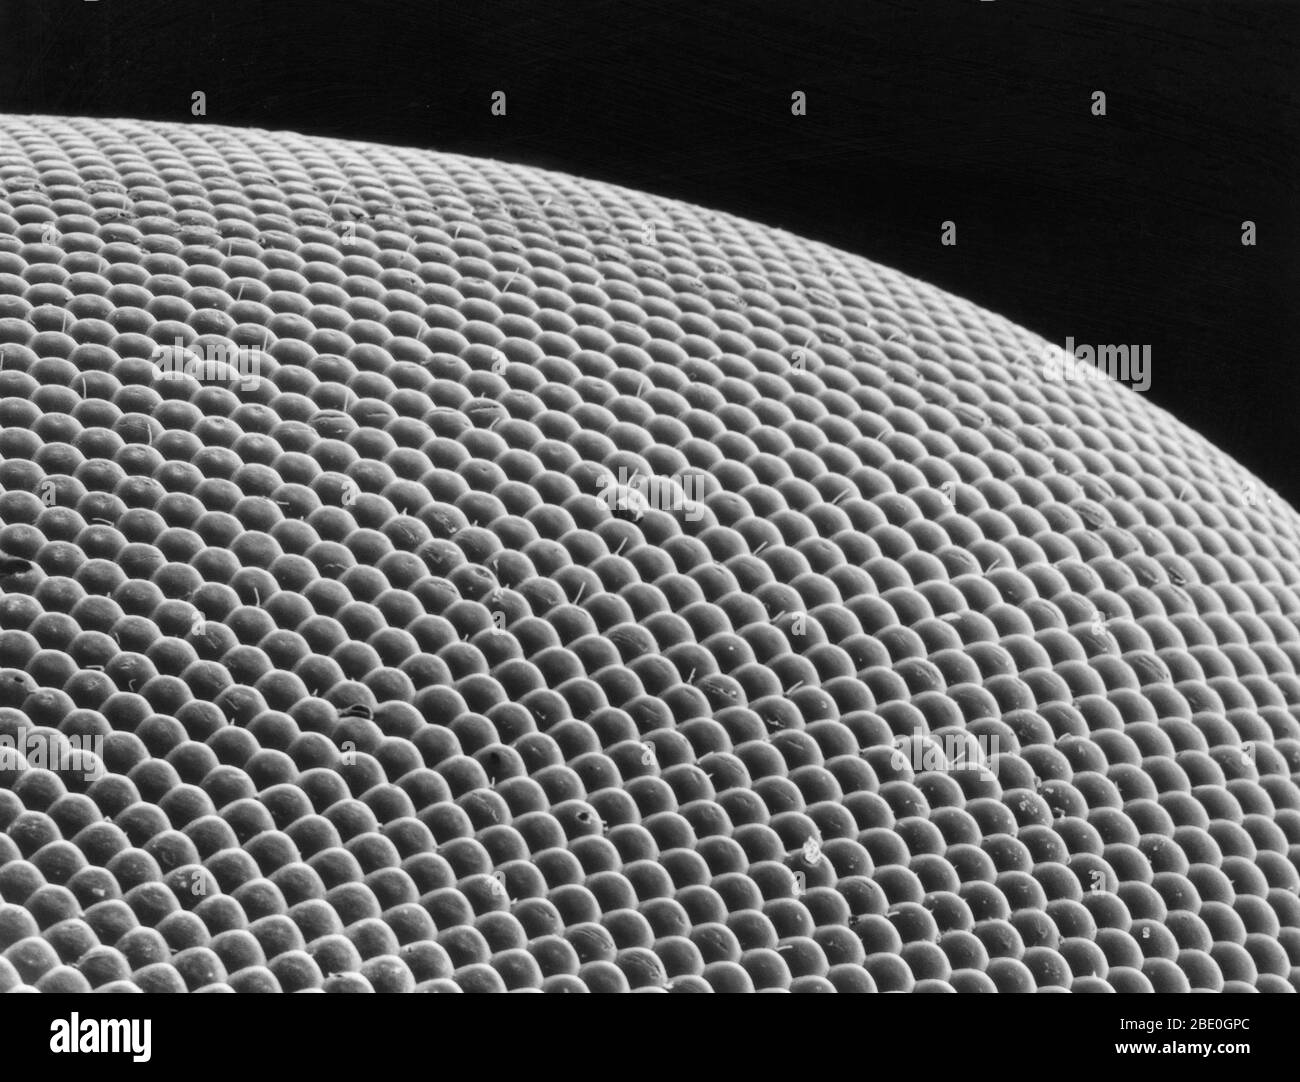 Deer fly eye viewed under a scanning electron microscope.  The large, green iridescent eyes of the deer fly are made up of thousands of individual lenses which allow the fly to see in slow motion. Each lens is approximately 25 microns in diameter. Note the short, protective hairs that emerge from the eye's surface between some of the lenses. (Magnification of 440x at print size 8'x11') Stock Photo